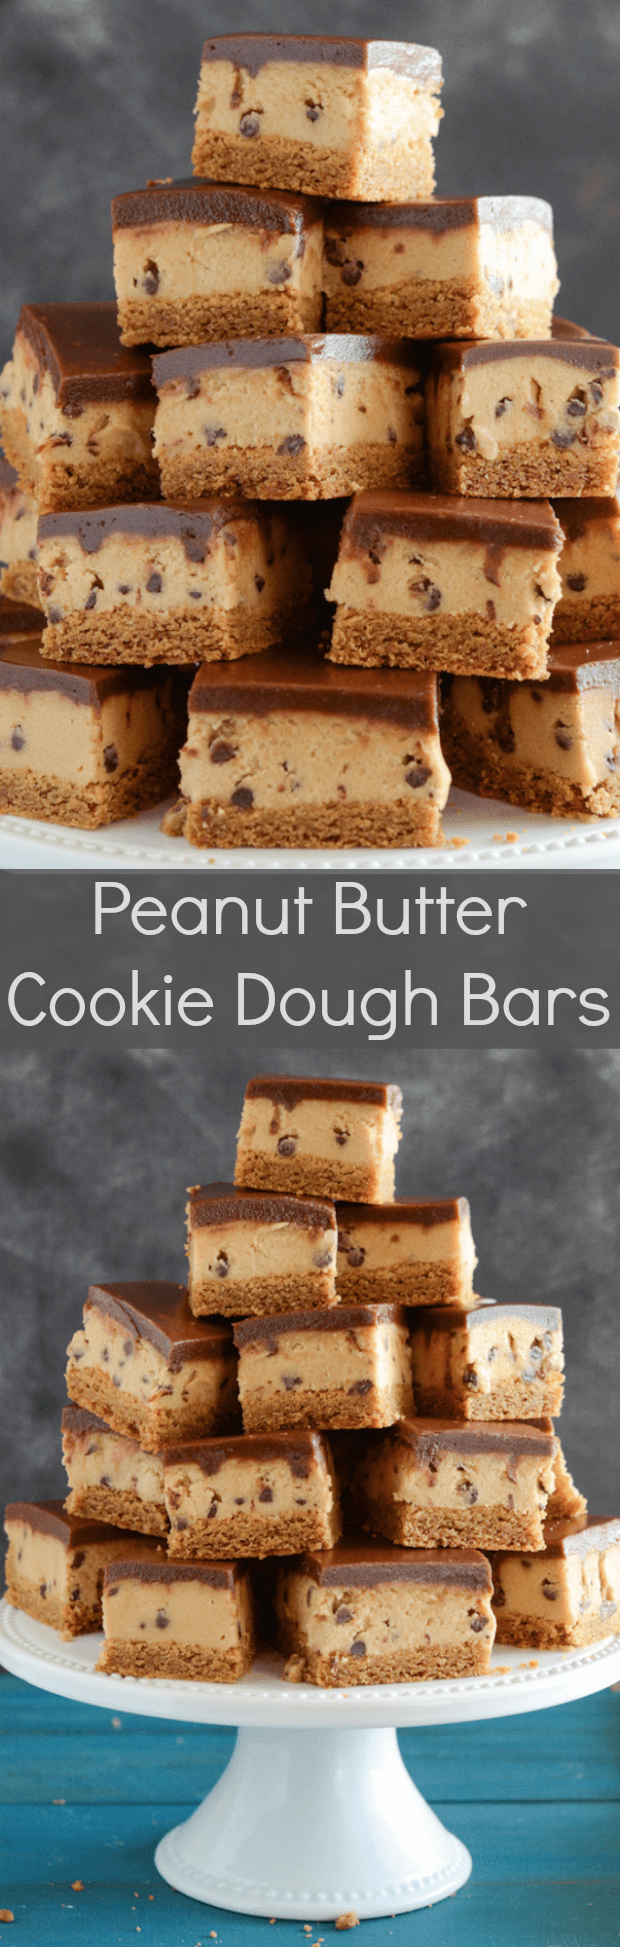 Peanut Butter Cookie Dough Bars - a layer of peanut butter cookie, then a thick layer of cookie dough and topped with chocolate ganache!